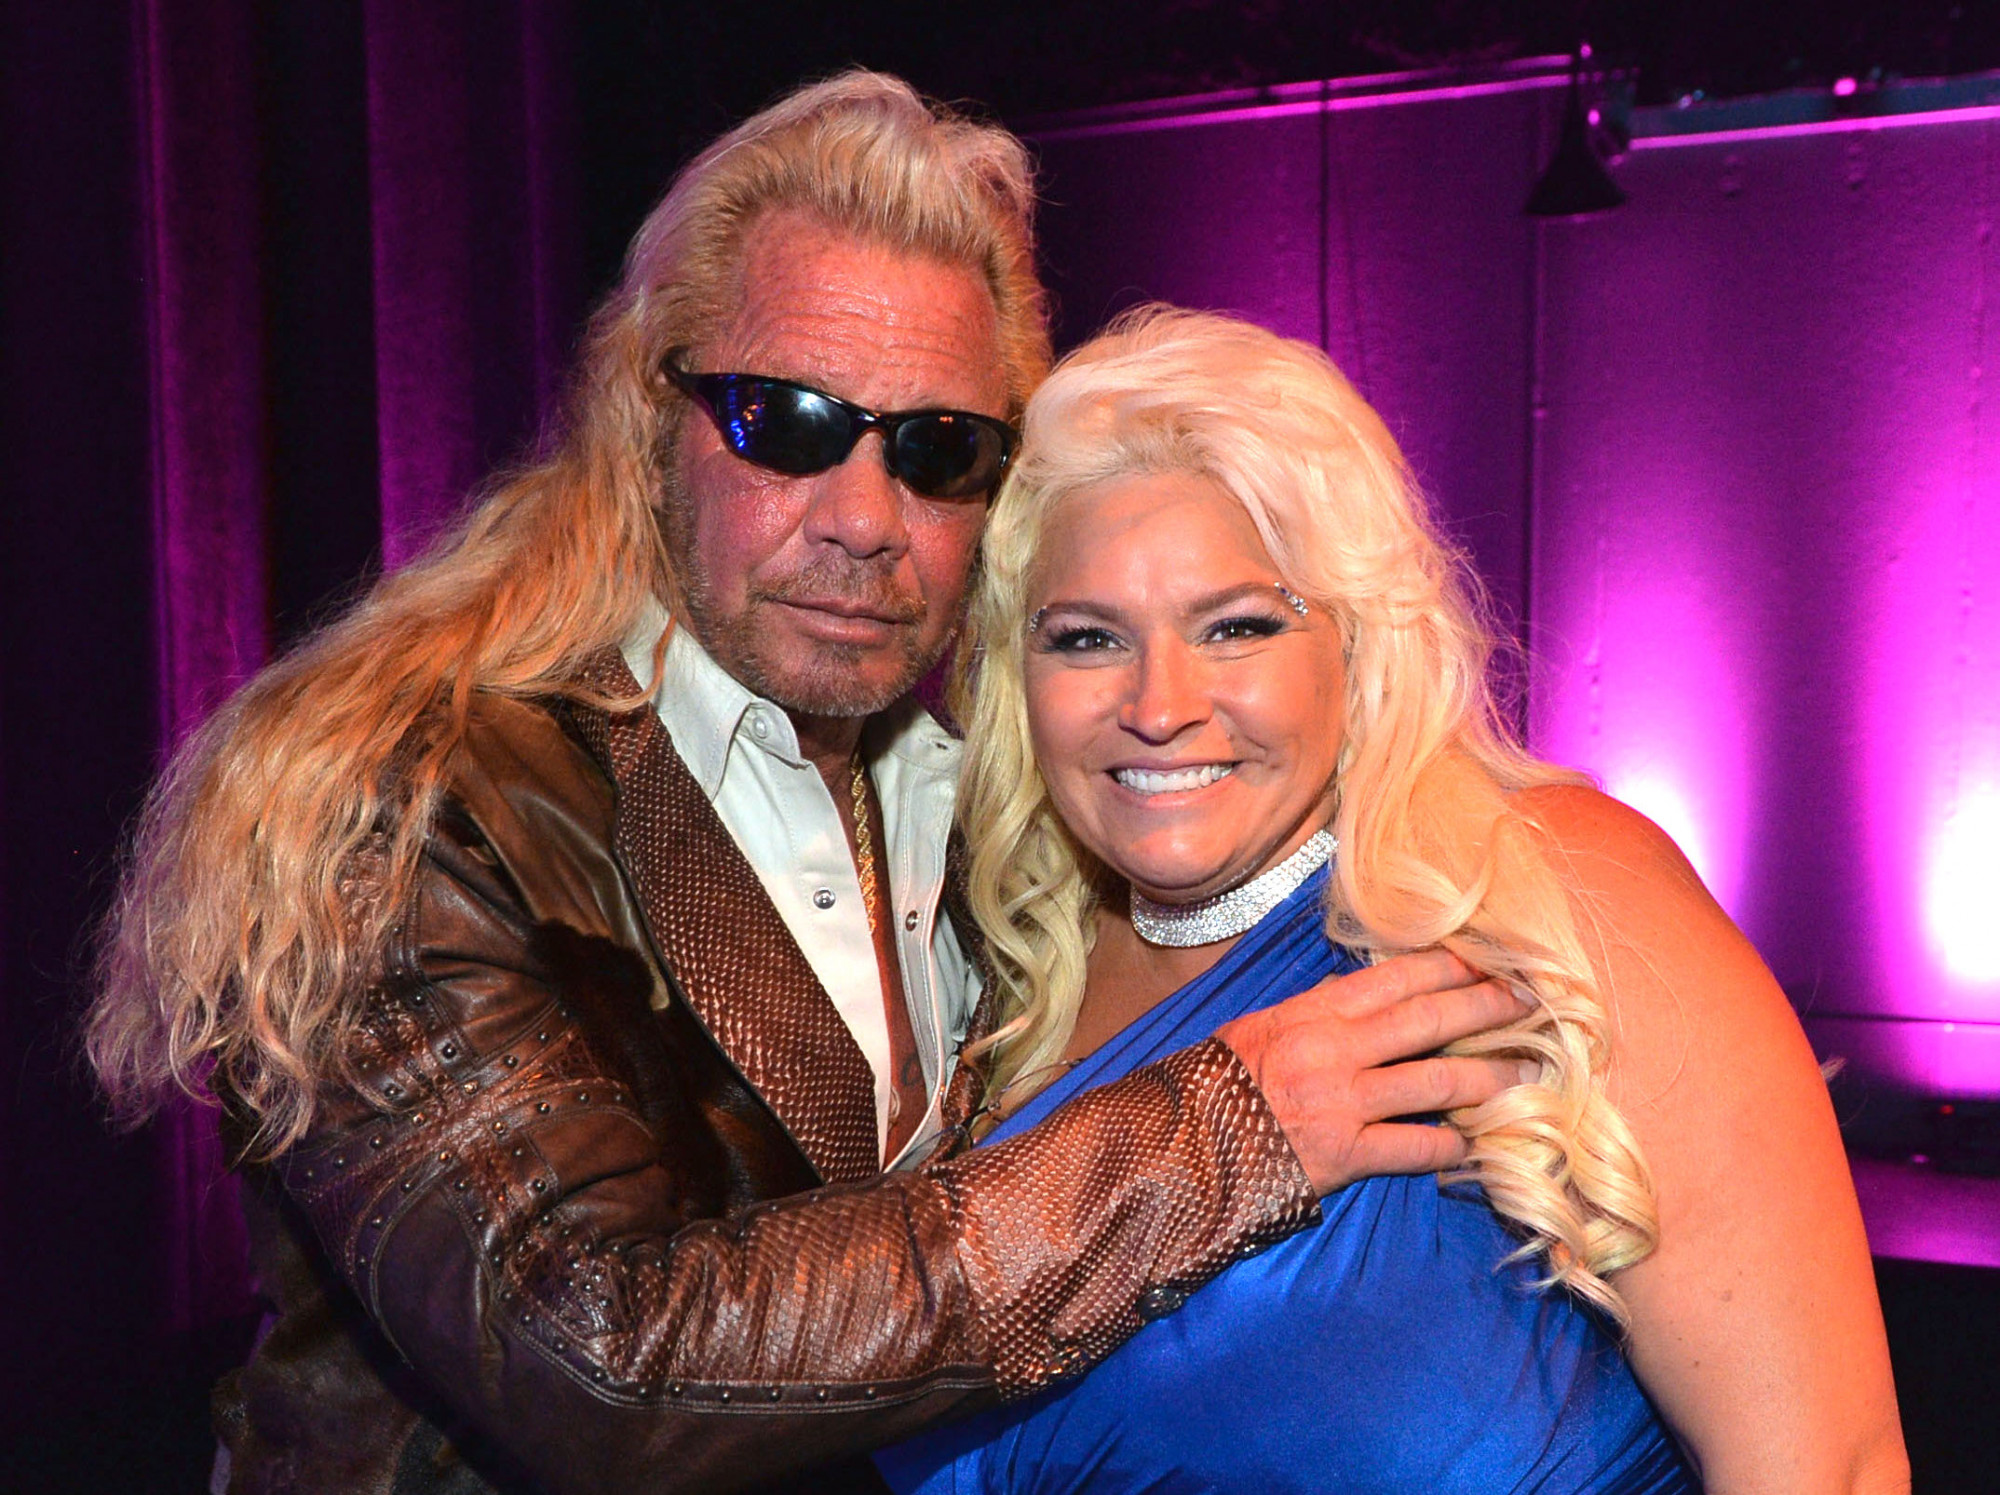 ‘Dog the Bounty Hunter’ Duane Chapman Shares Update With Fans Amid Wife’s Coma